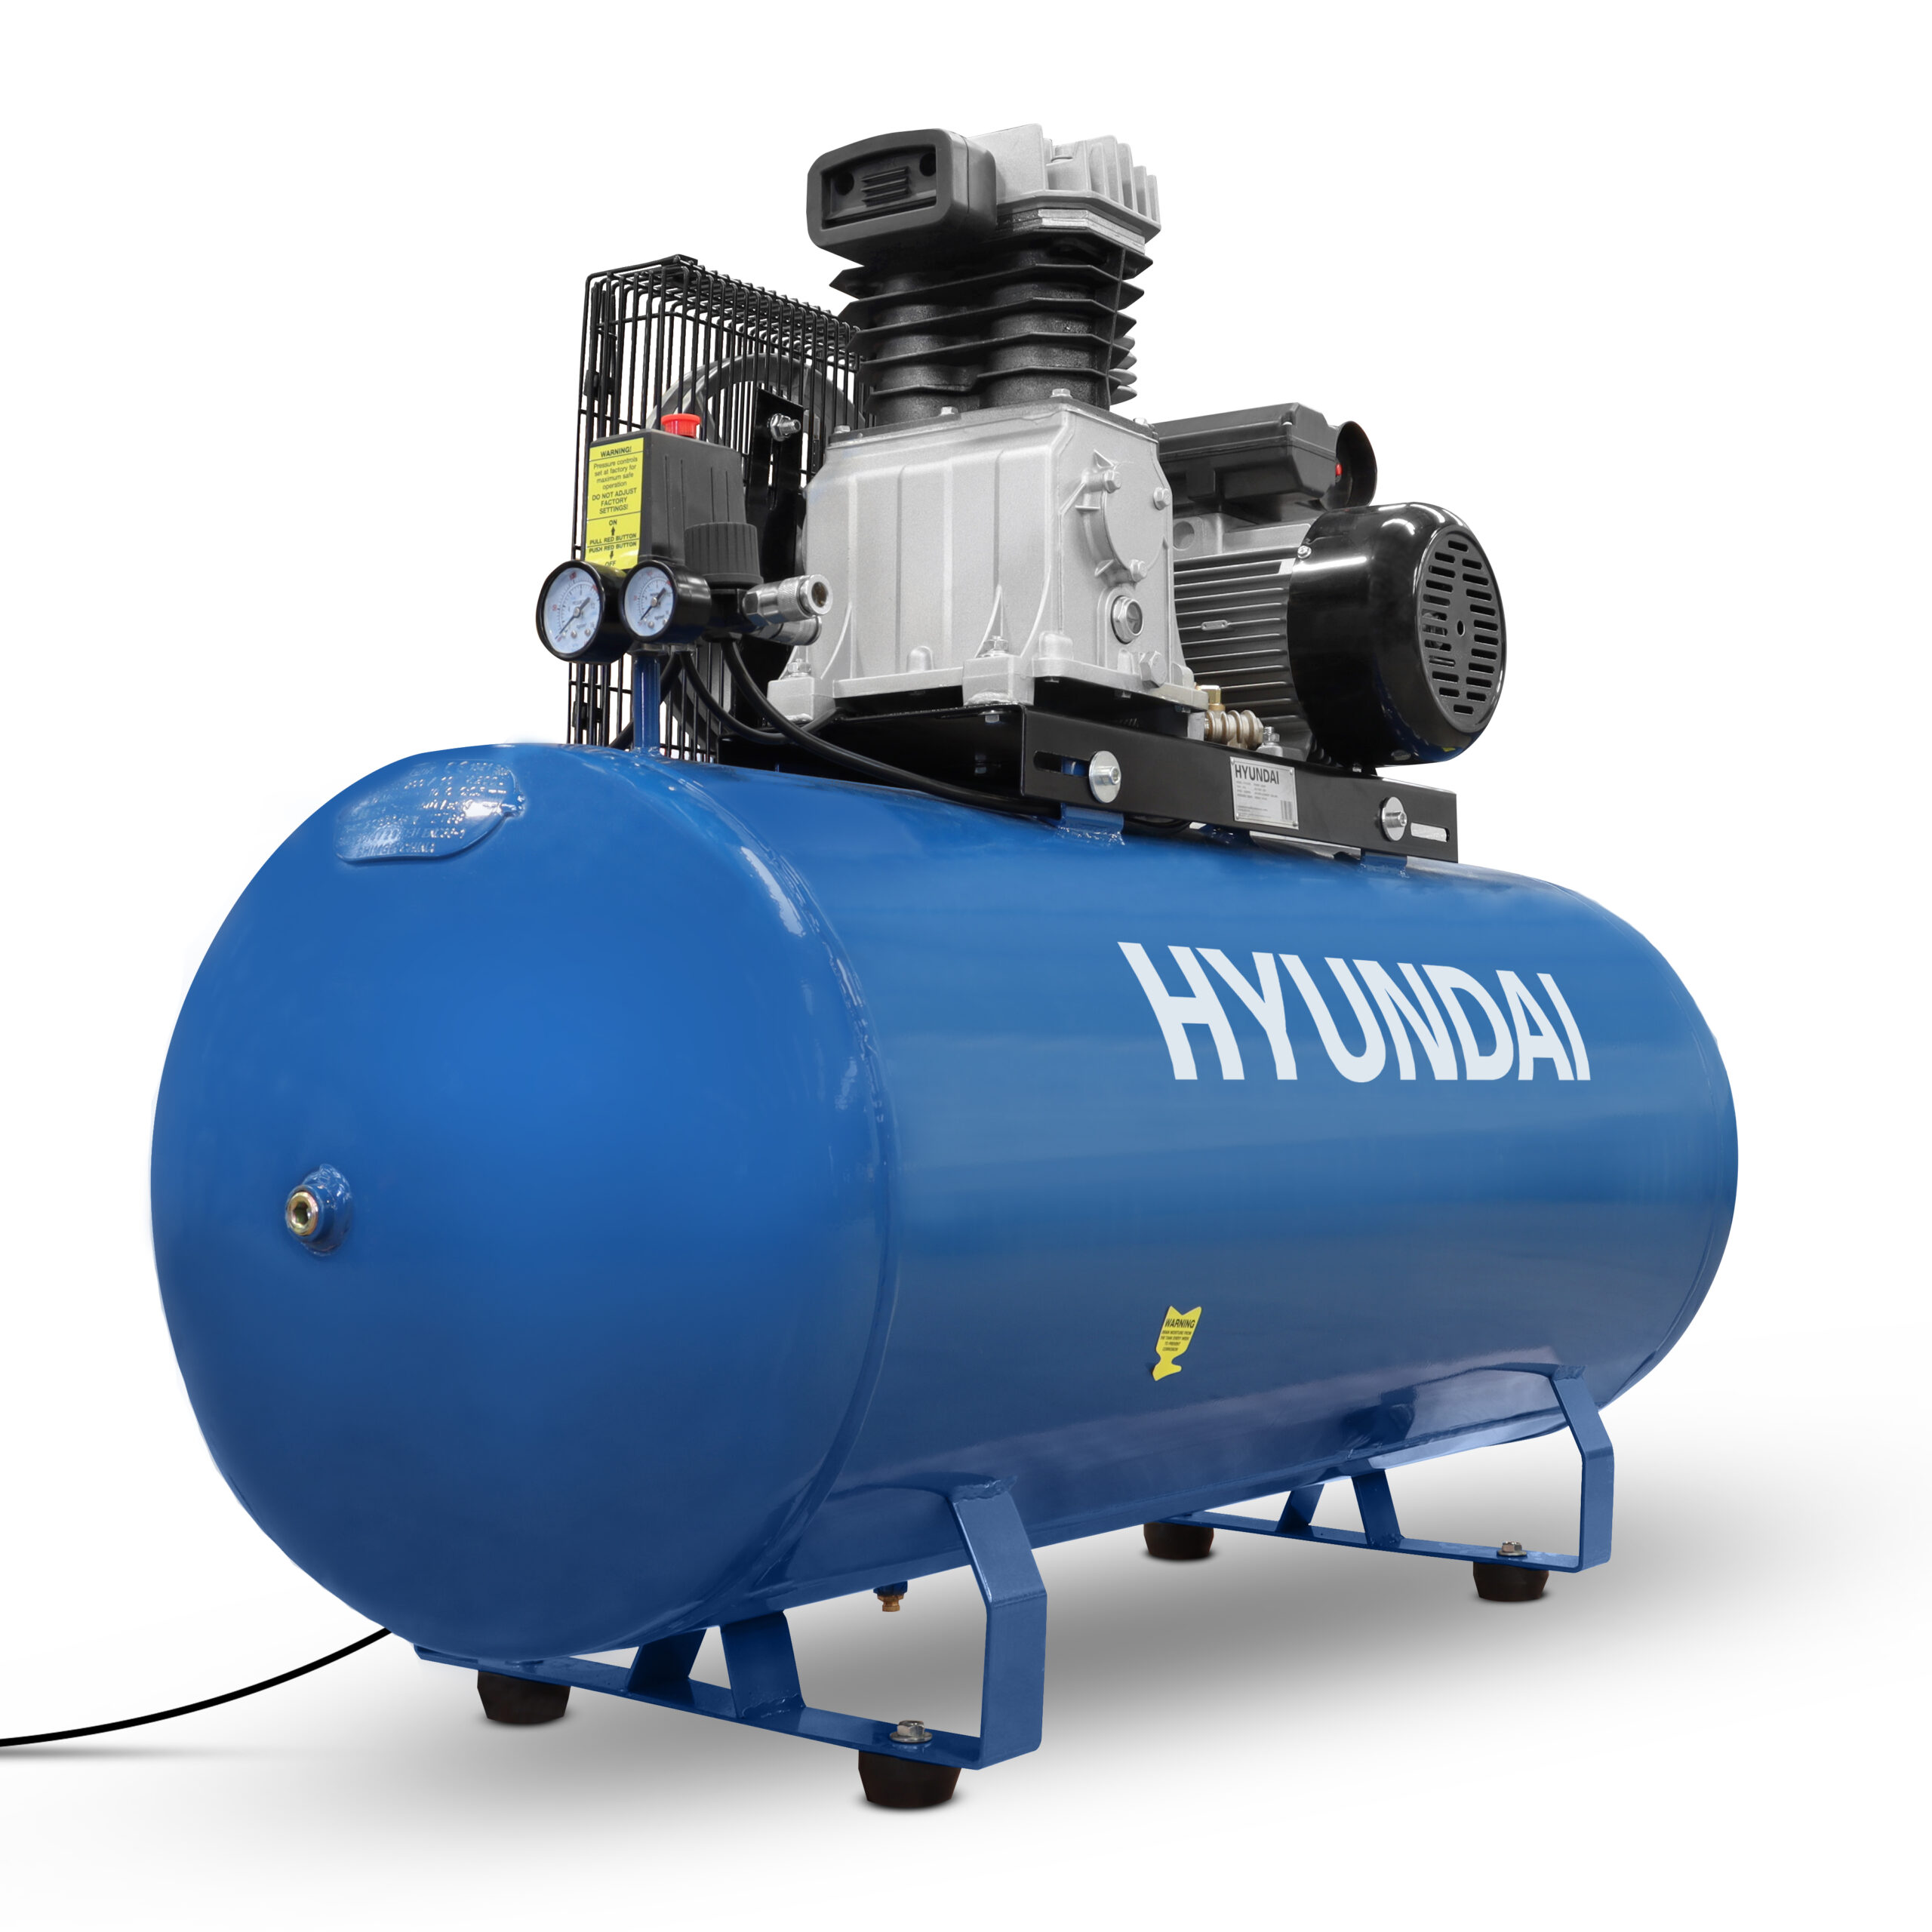 UK Suppliers Hyundai 200 Litre Air Compressor, &#34;Pro Series&#34;, Electric, 3hp - HY3200S